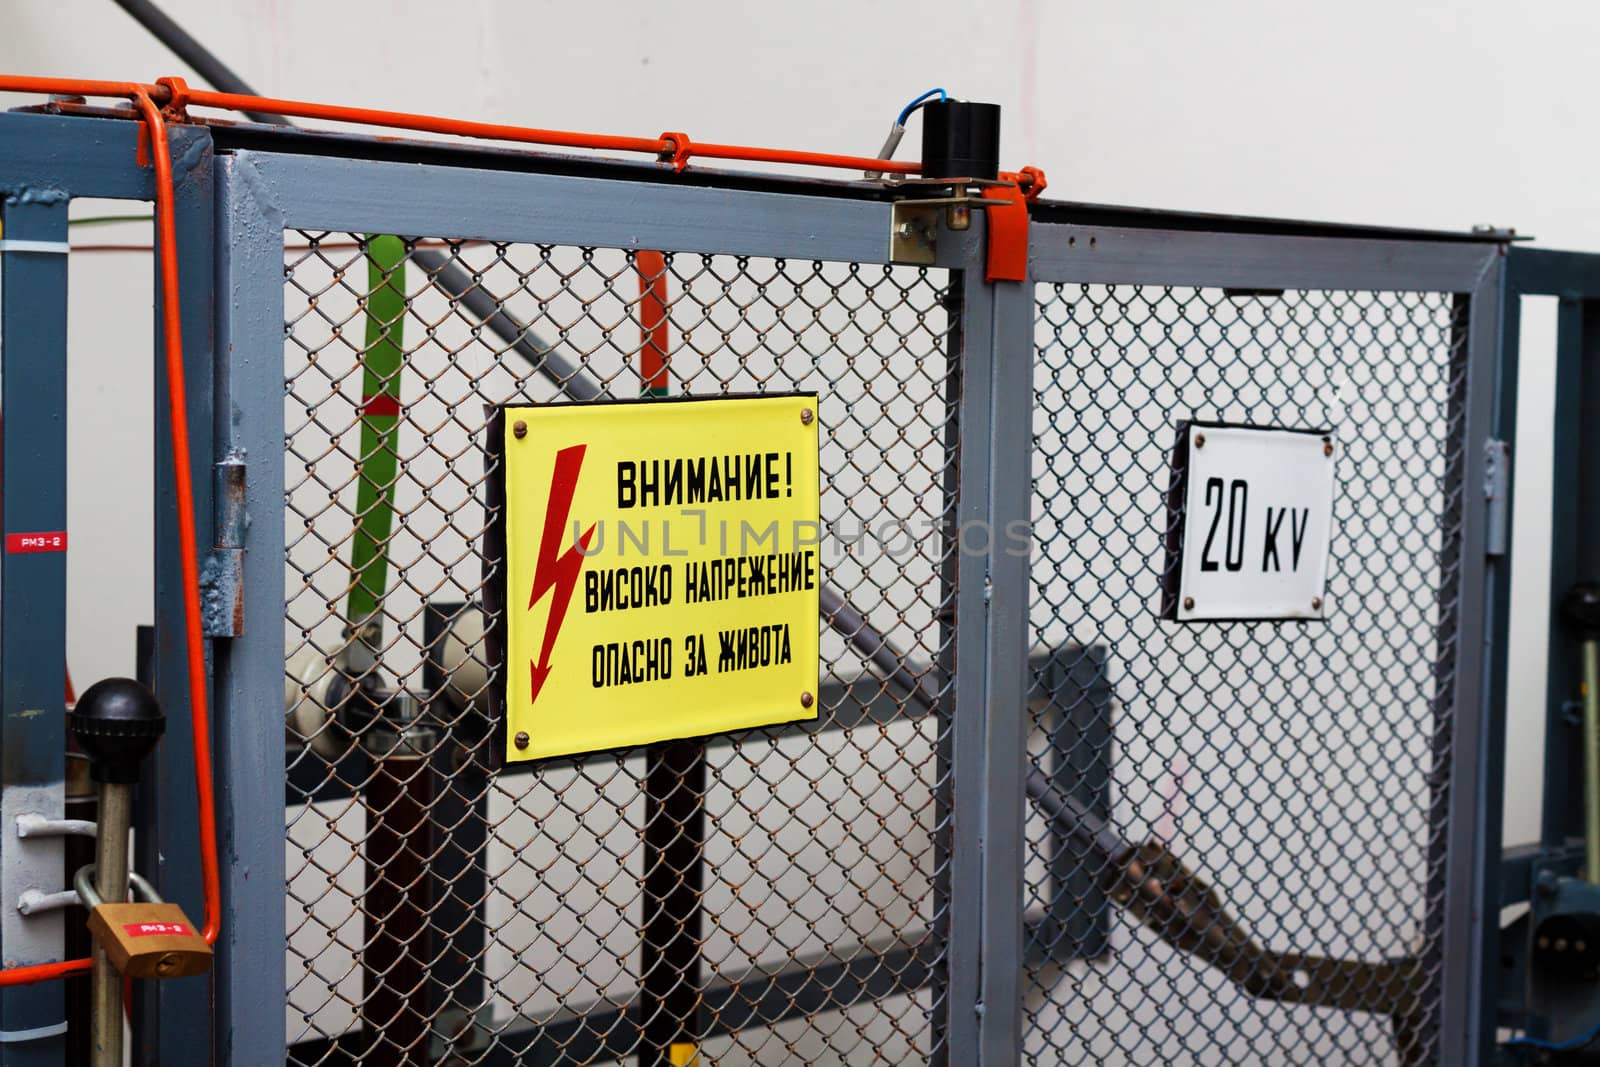 High voltage warning signs on a fence before the equipement by Lamarinx